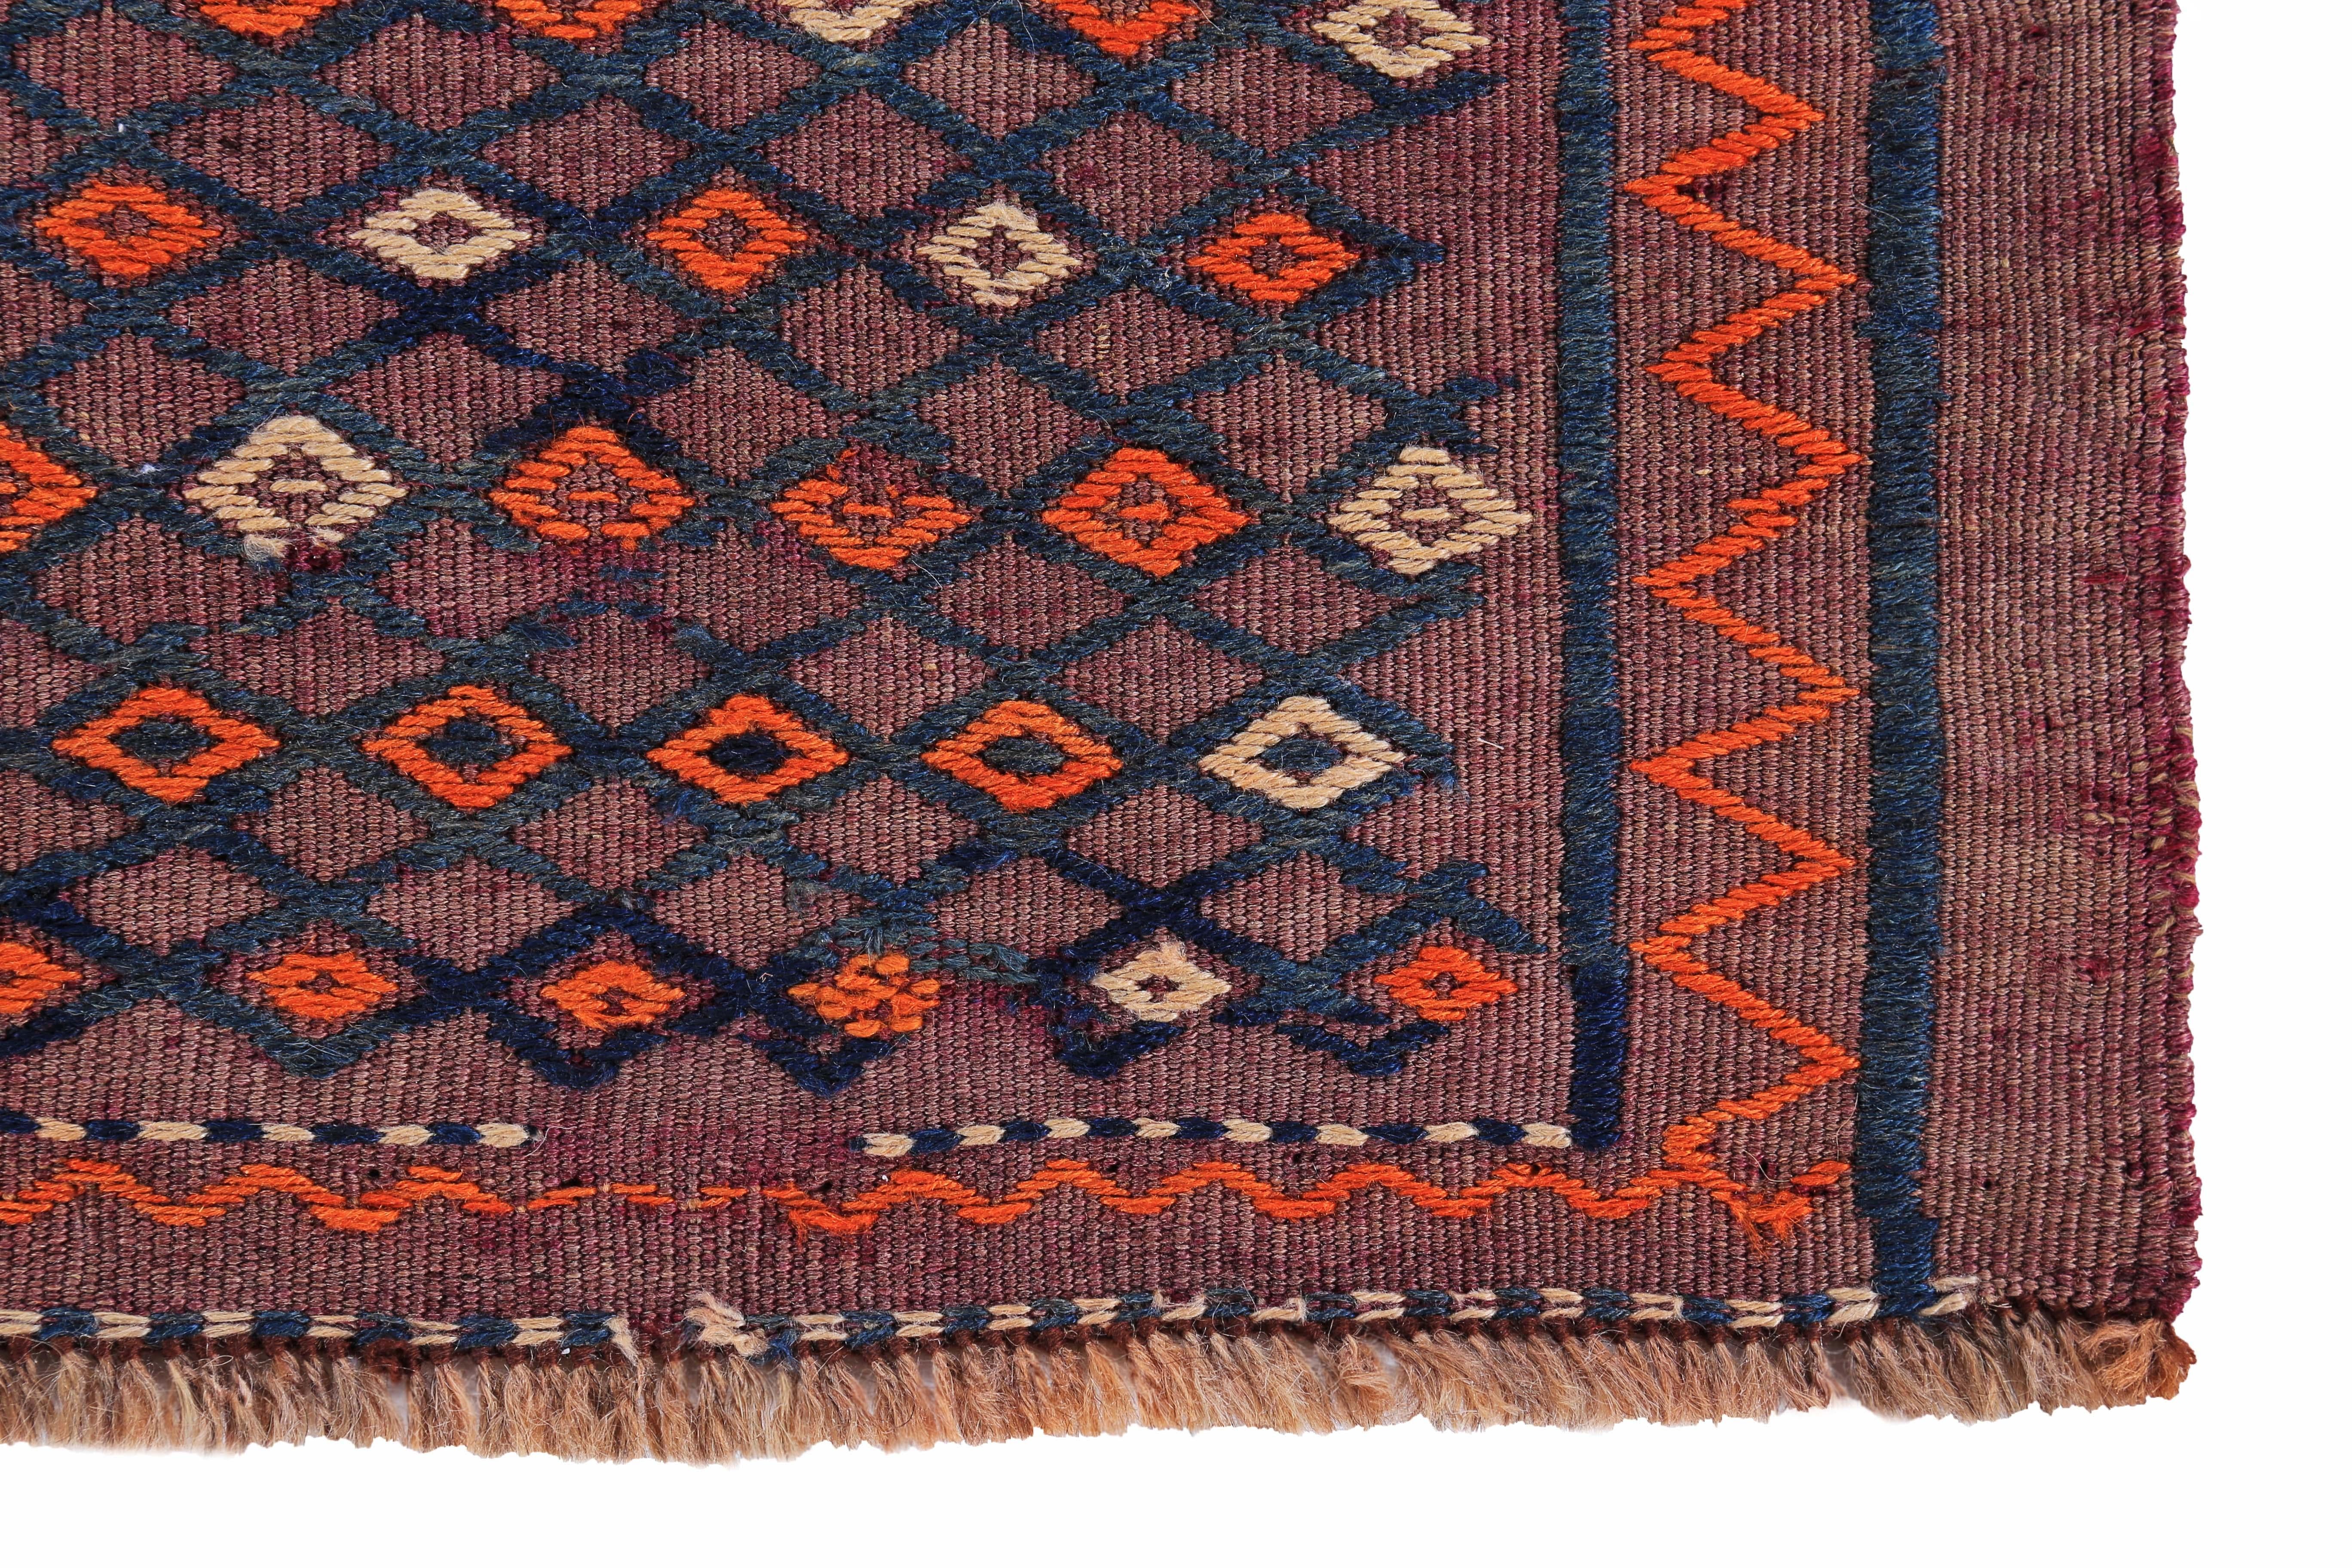 Hand-Woven Modern Turkish Kilim Rug with Navy and Orange Tribal Design on Red Field